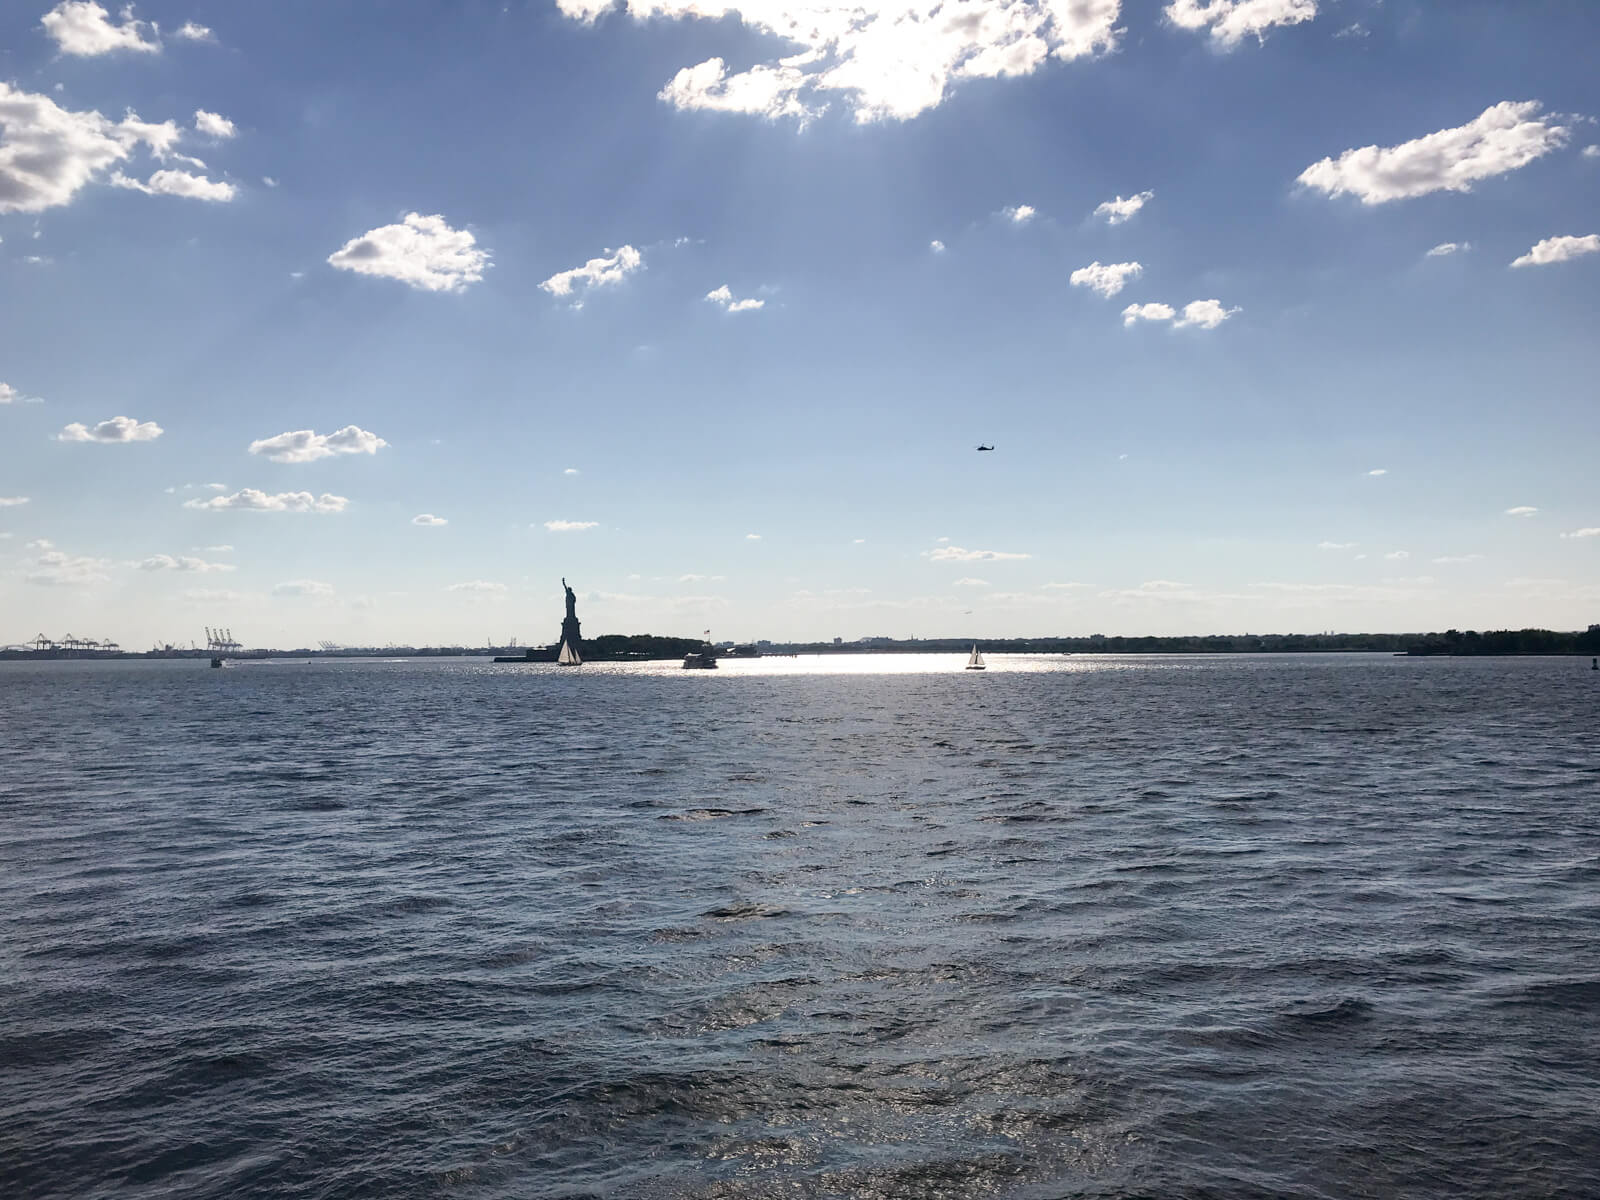 The Statue of Liberty as seen from a ferry on the water. There is little sunlight as the sun has moved behind the clouds